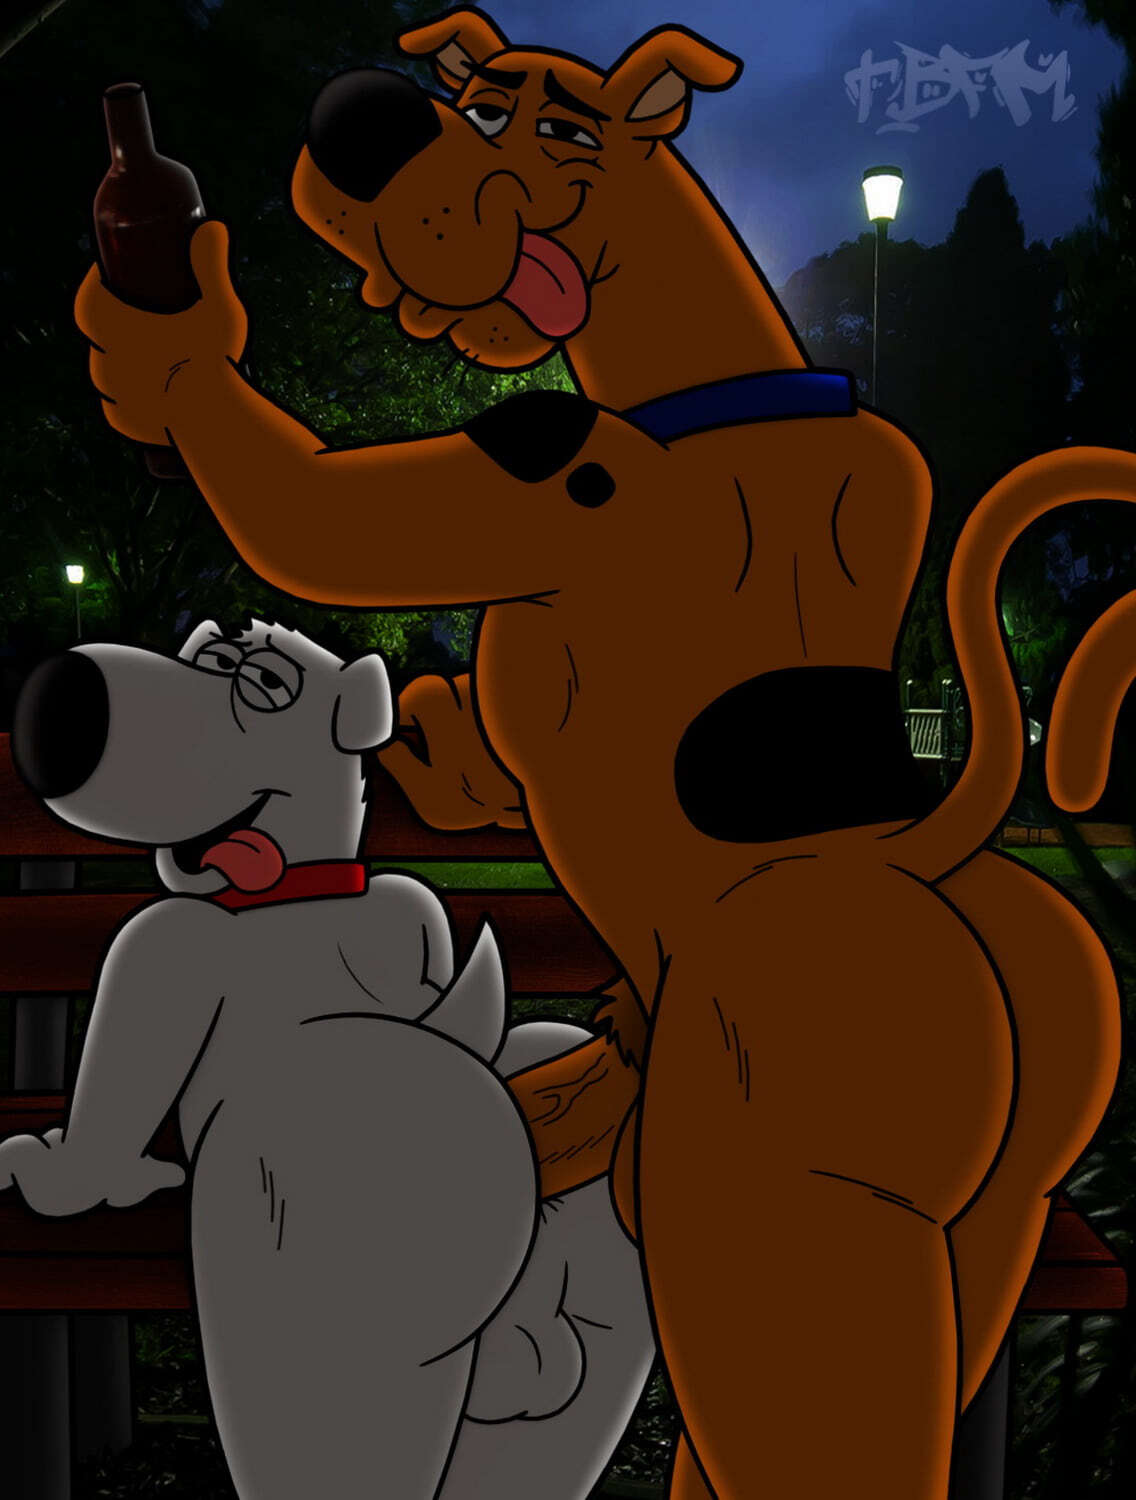 Scooby Doo pics tagged as drunk sex, sex, gay, furry. 